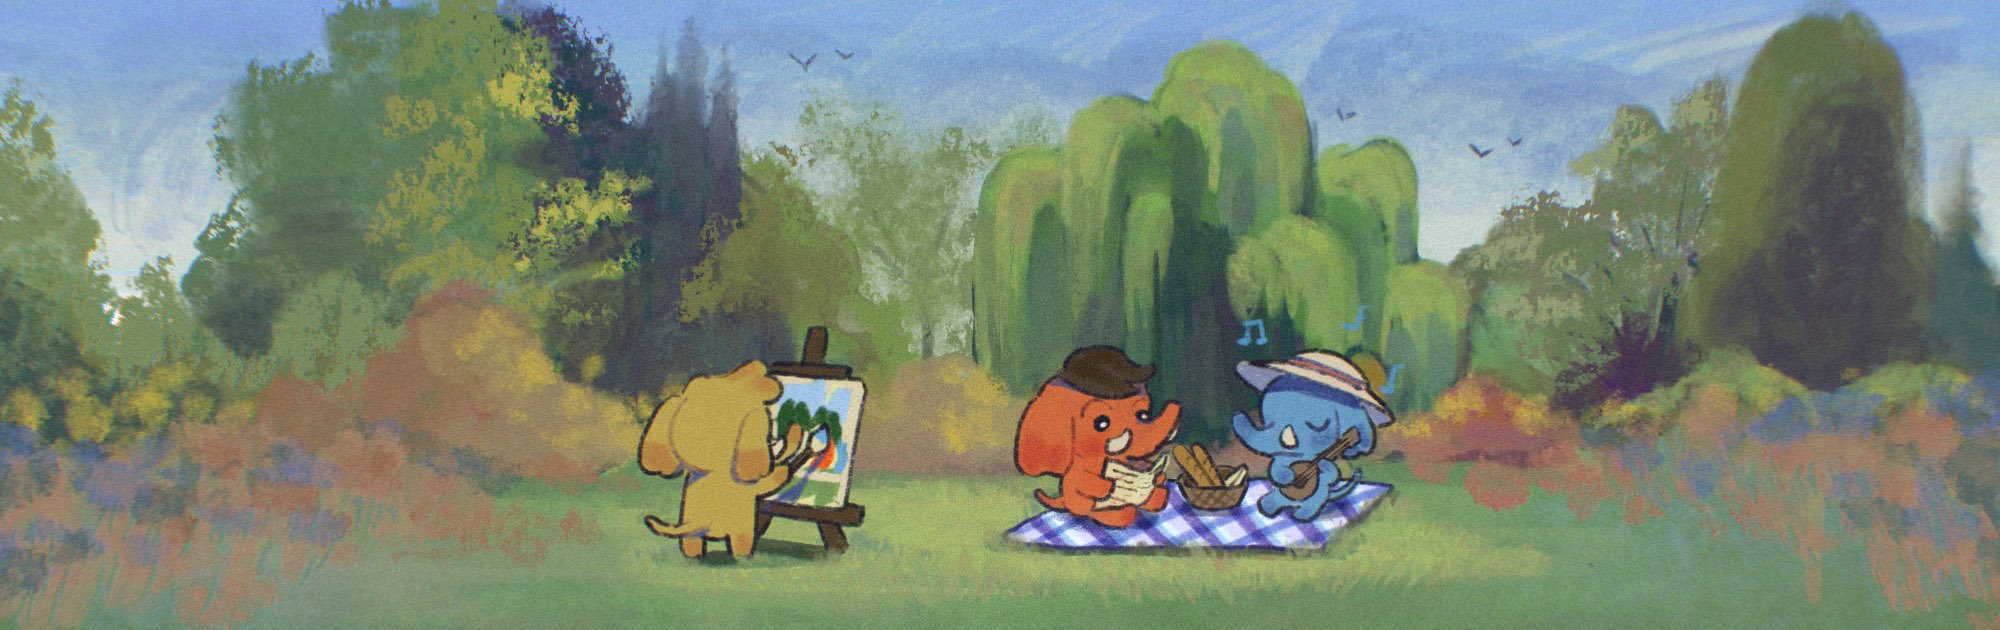 stylized digital painting of cartoon mastodons having a picnic in a garden, two sitting on a blanket reading and playing music, while a third paints the scene at an easel